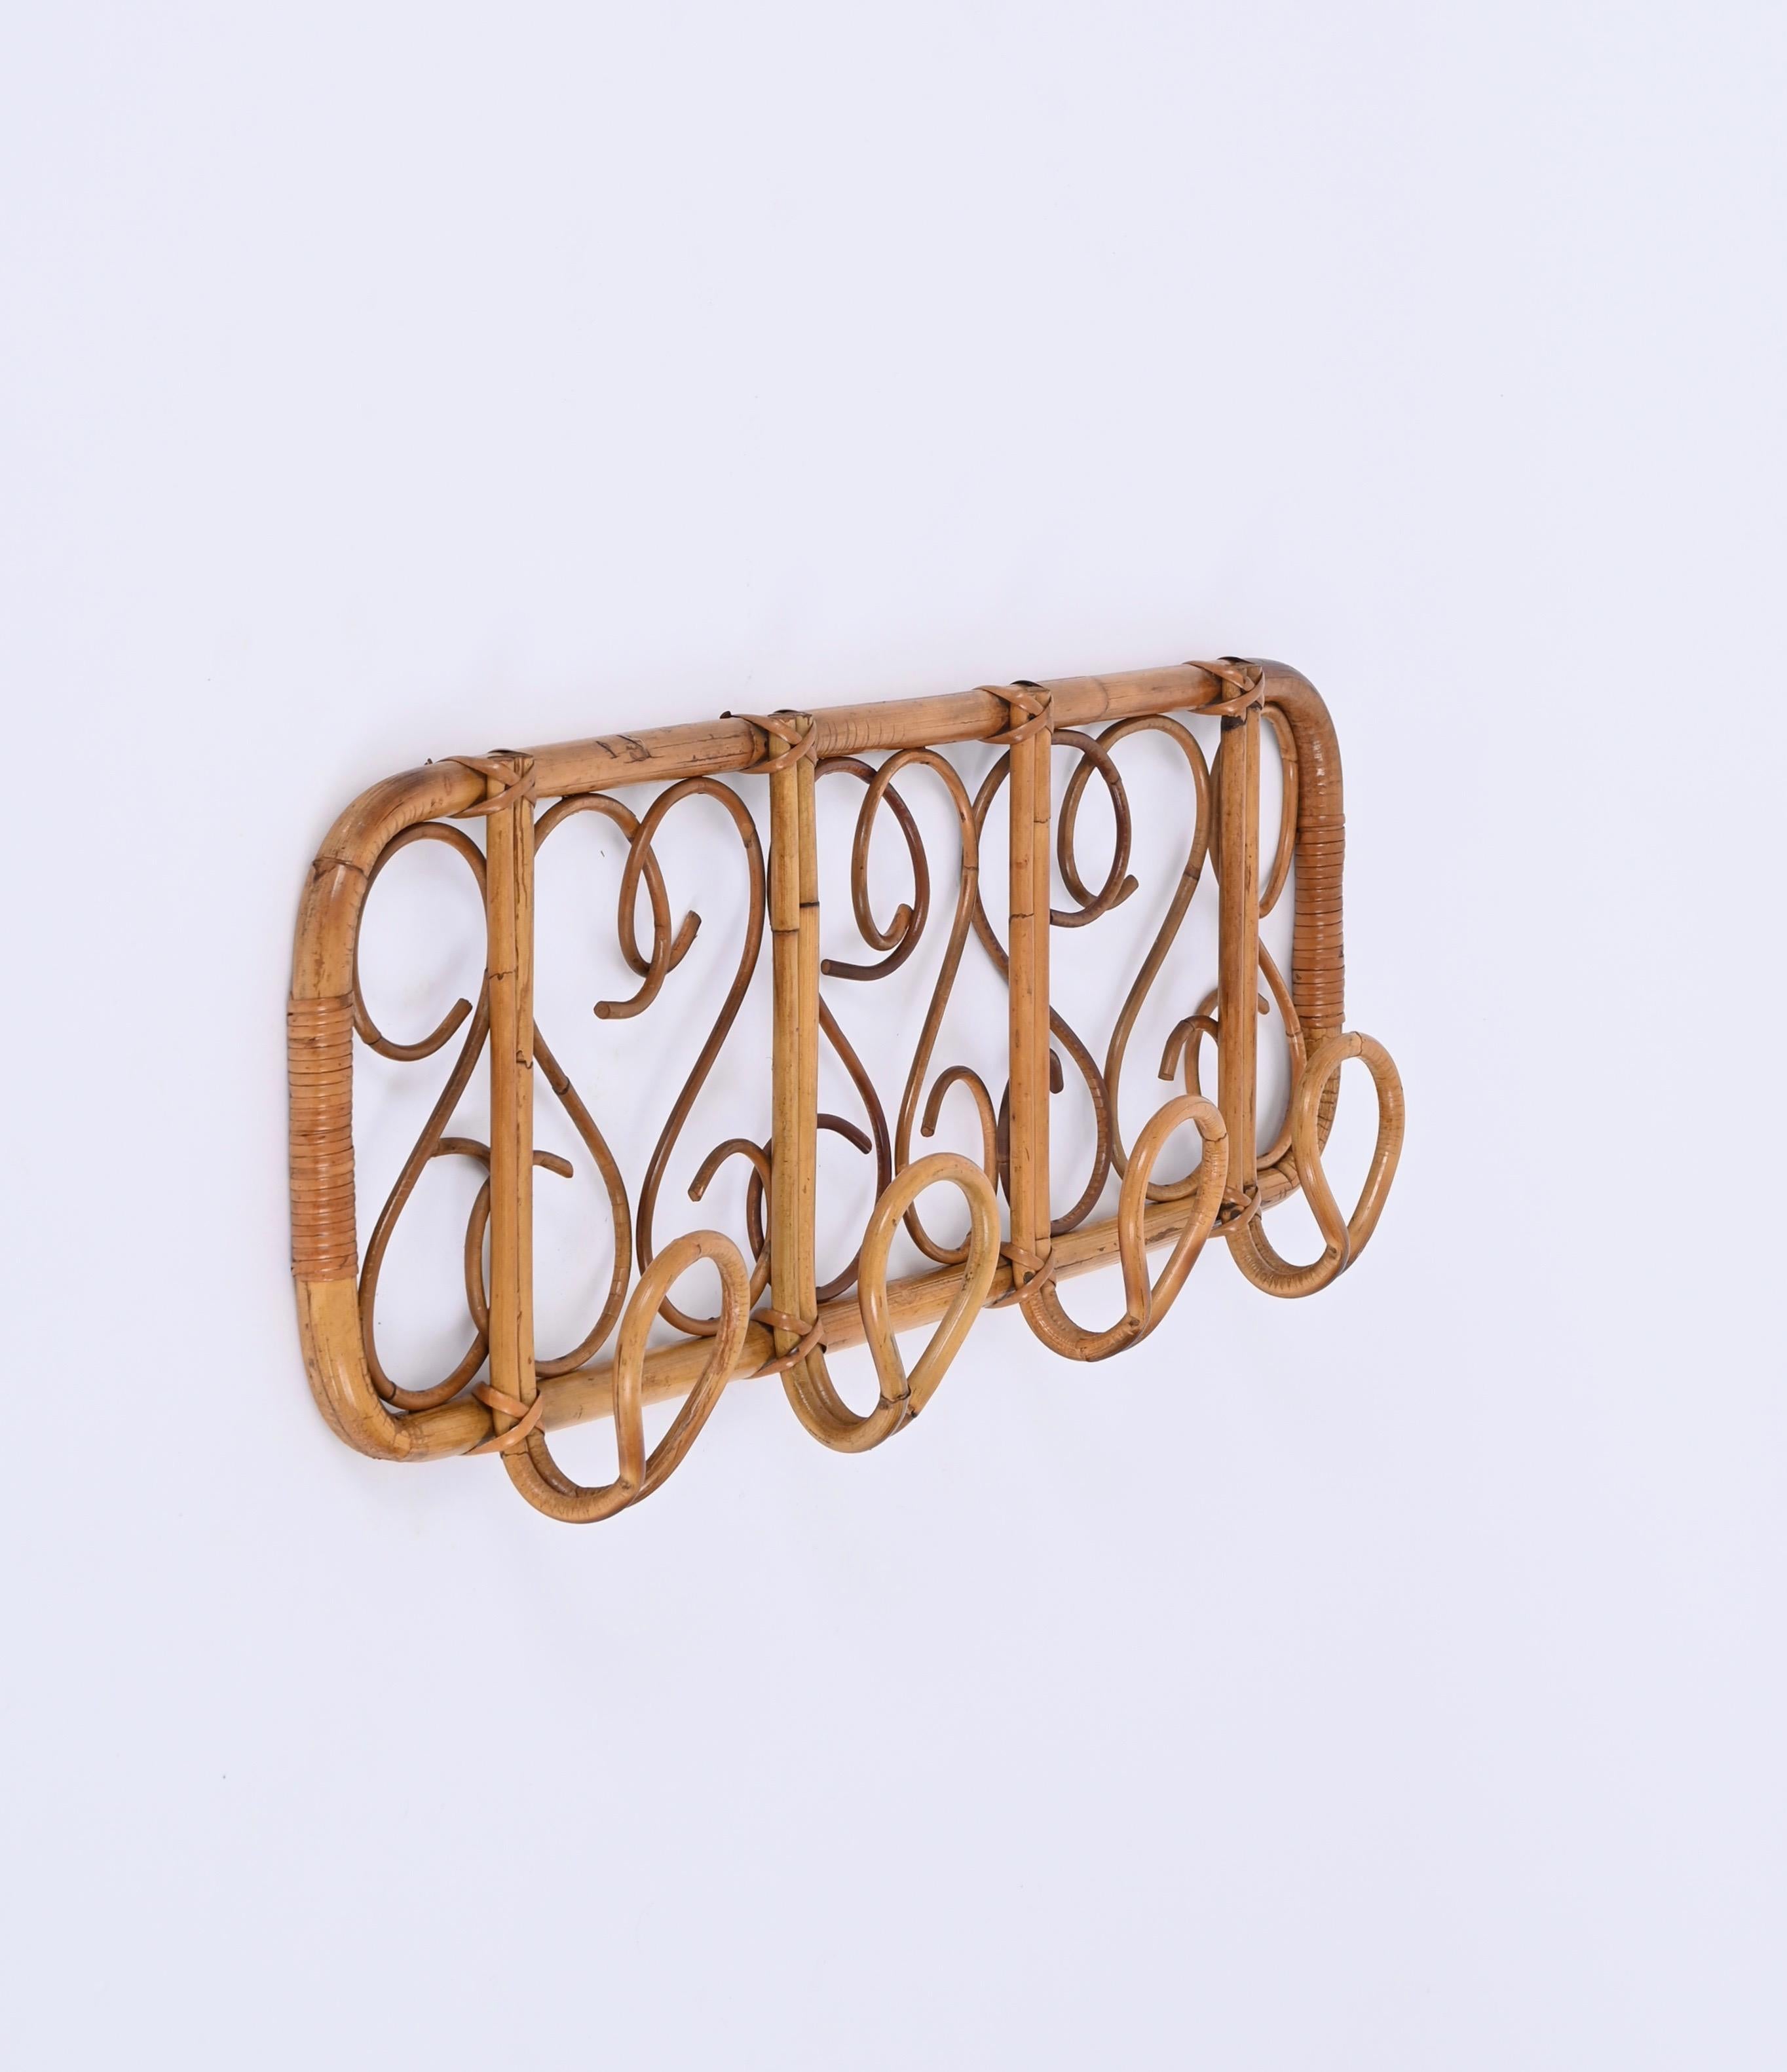 Stunning French Riviera Mid-Century coat hanger in curved bamboo, rattan and wicker. This wonderful piece was designed in Italy during the 1960s.

This unique item features a rectangular structure in curved bamboo with four perfect hooks made in